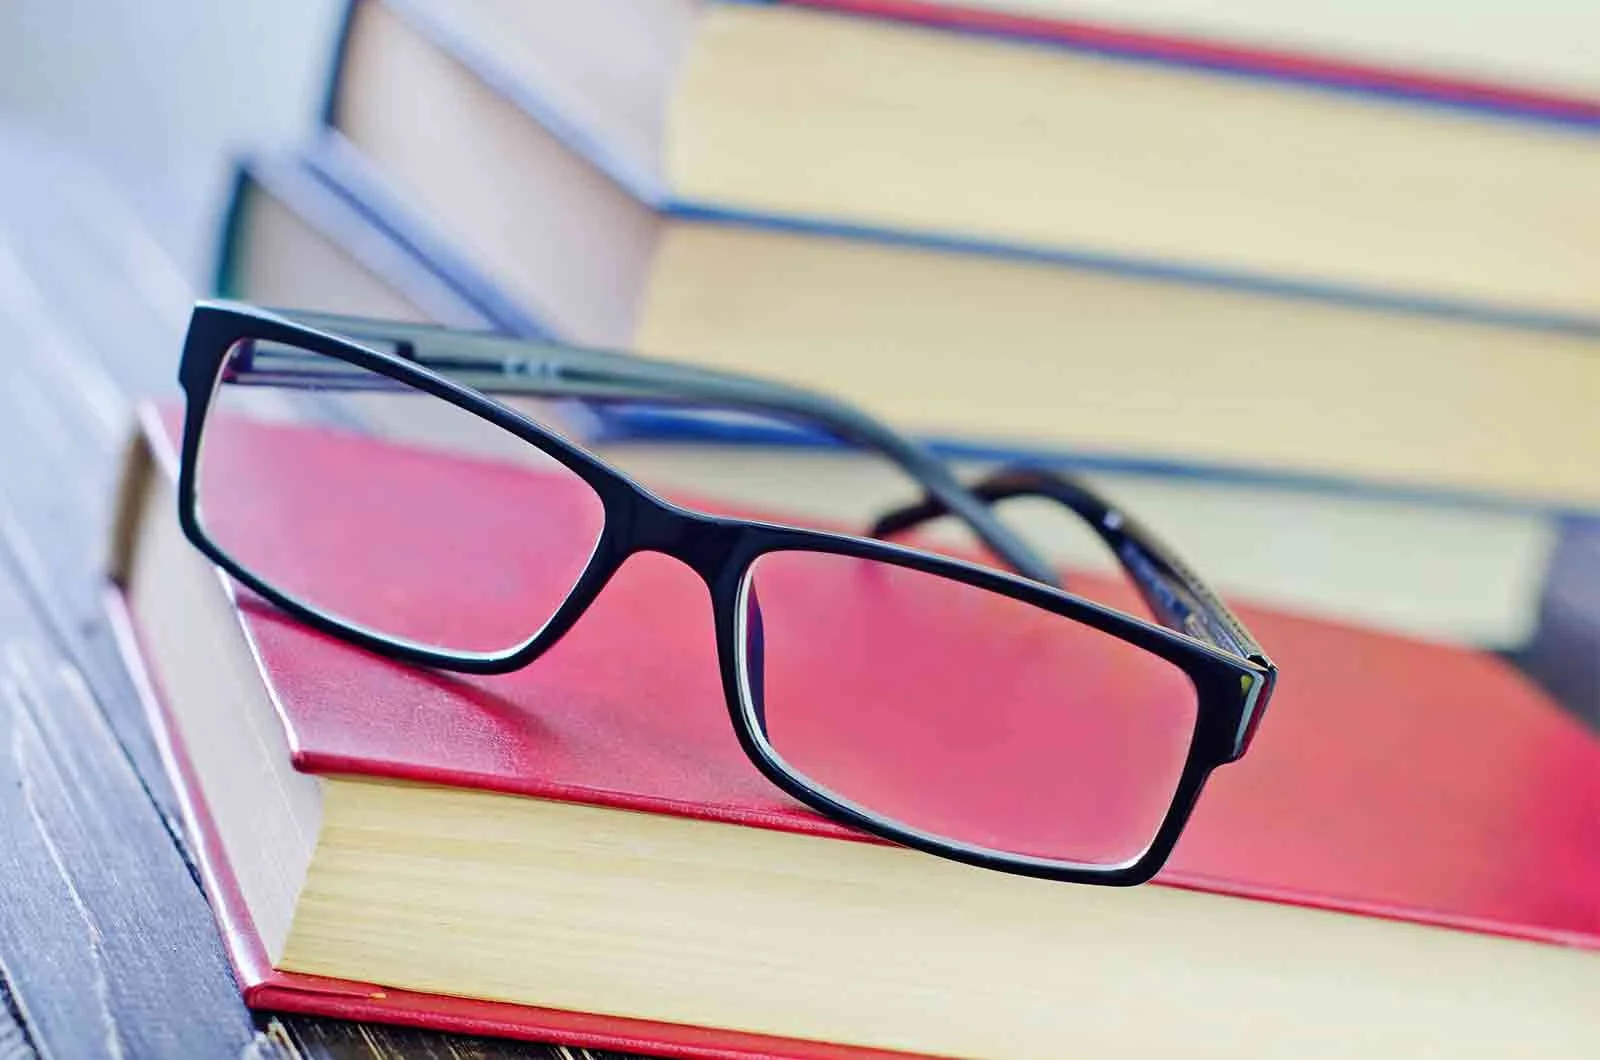 Medical glasses placed on a red book, next to several other books. Concept of editing and proofreading services and professional editors and proofreaders.